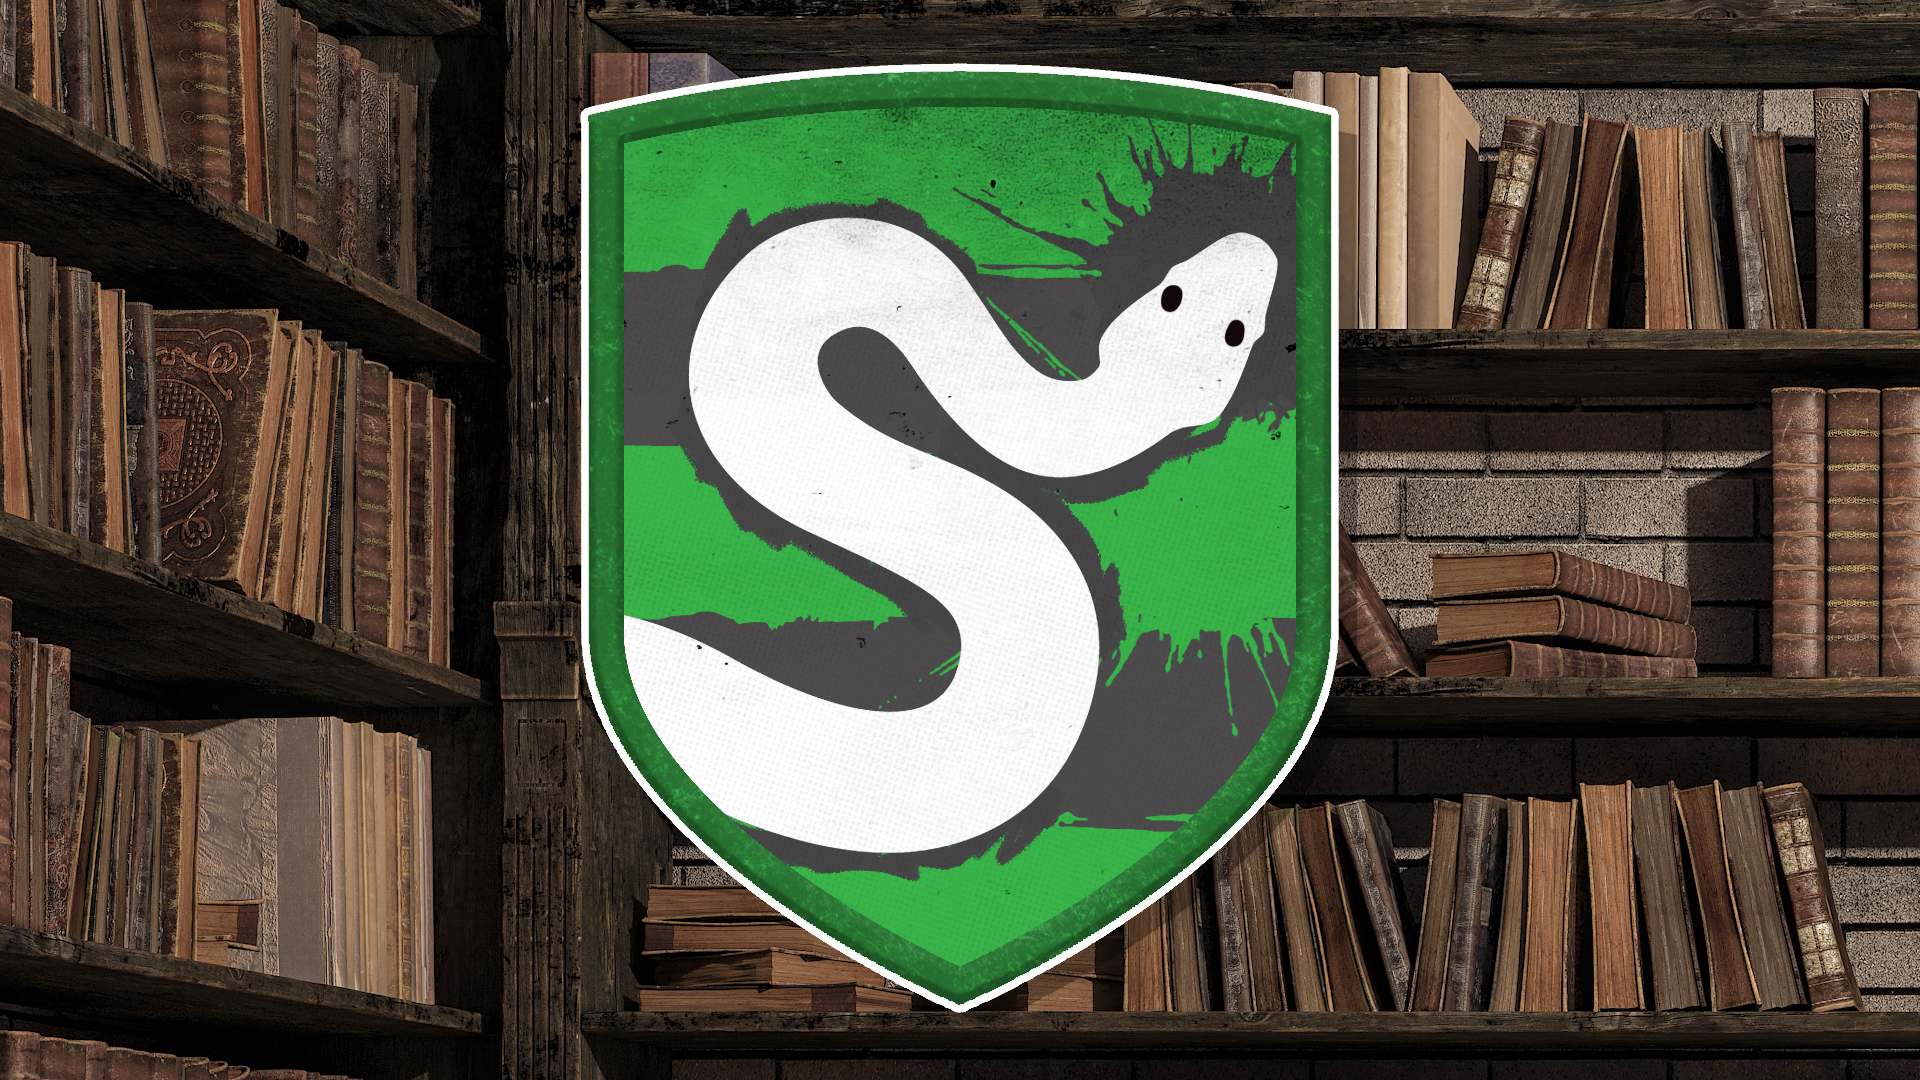 The Slytherin badge